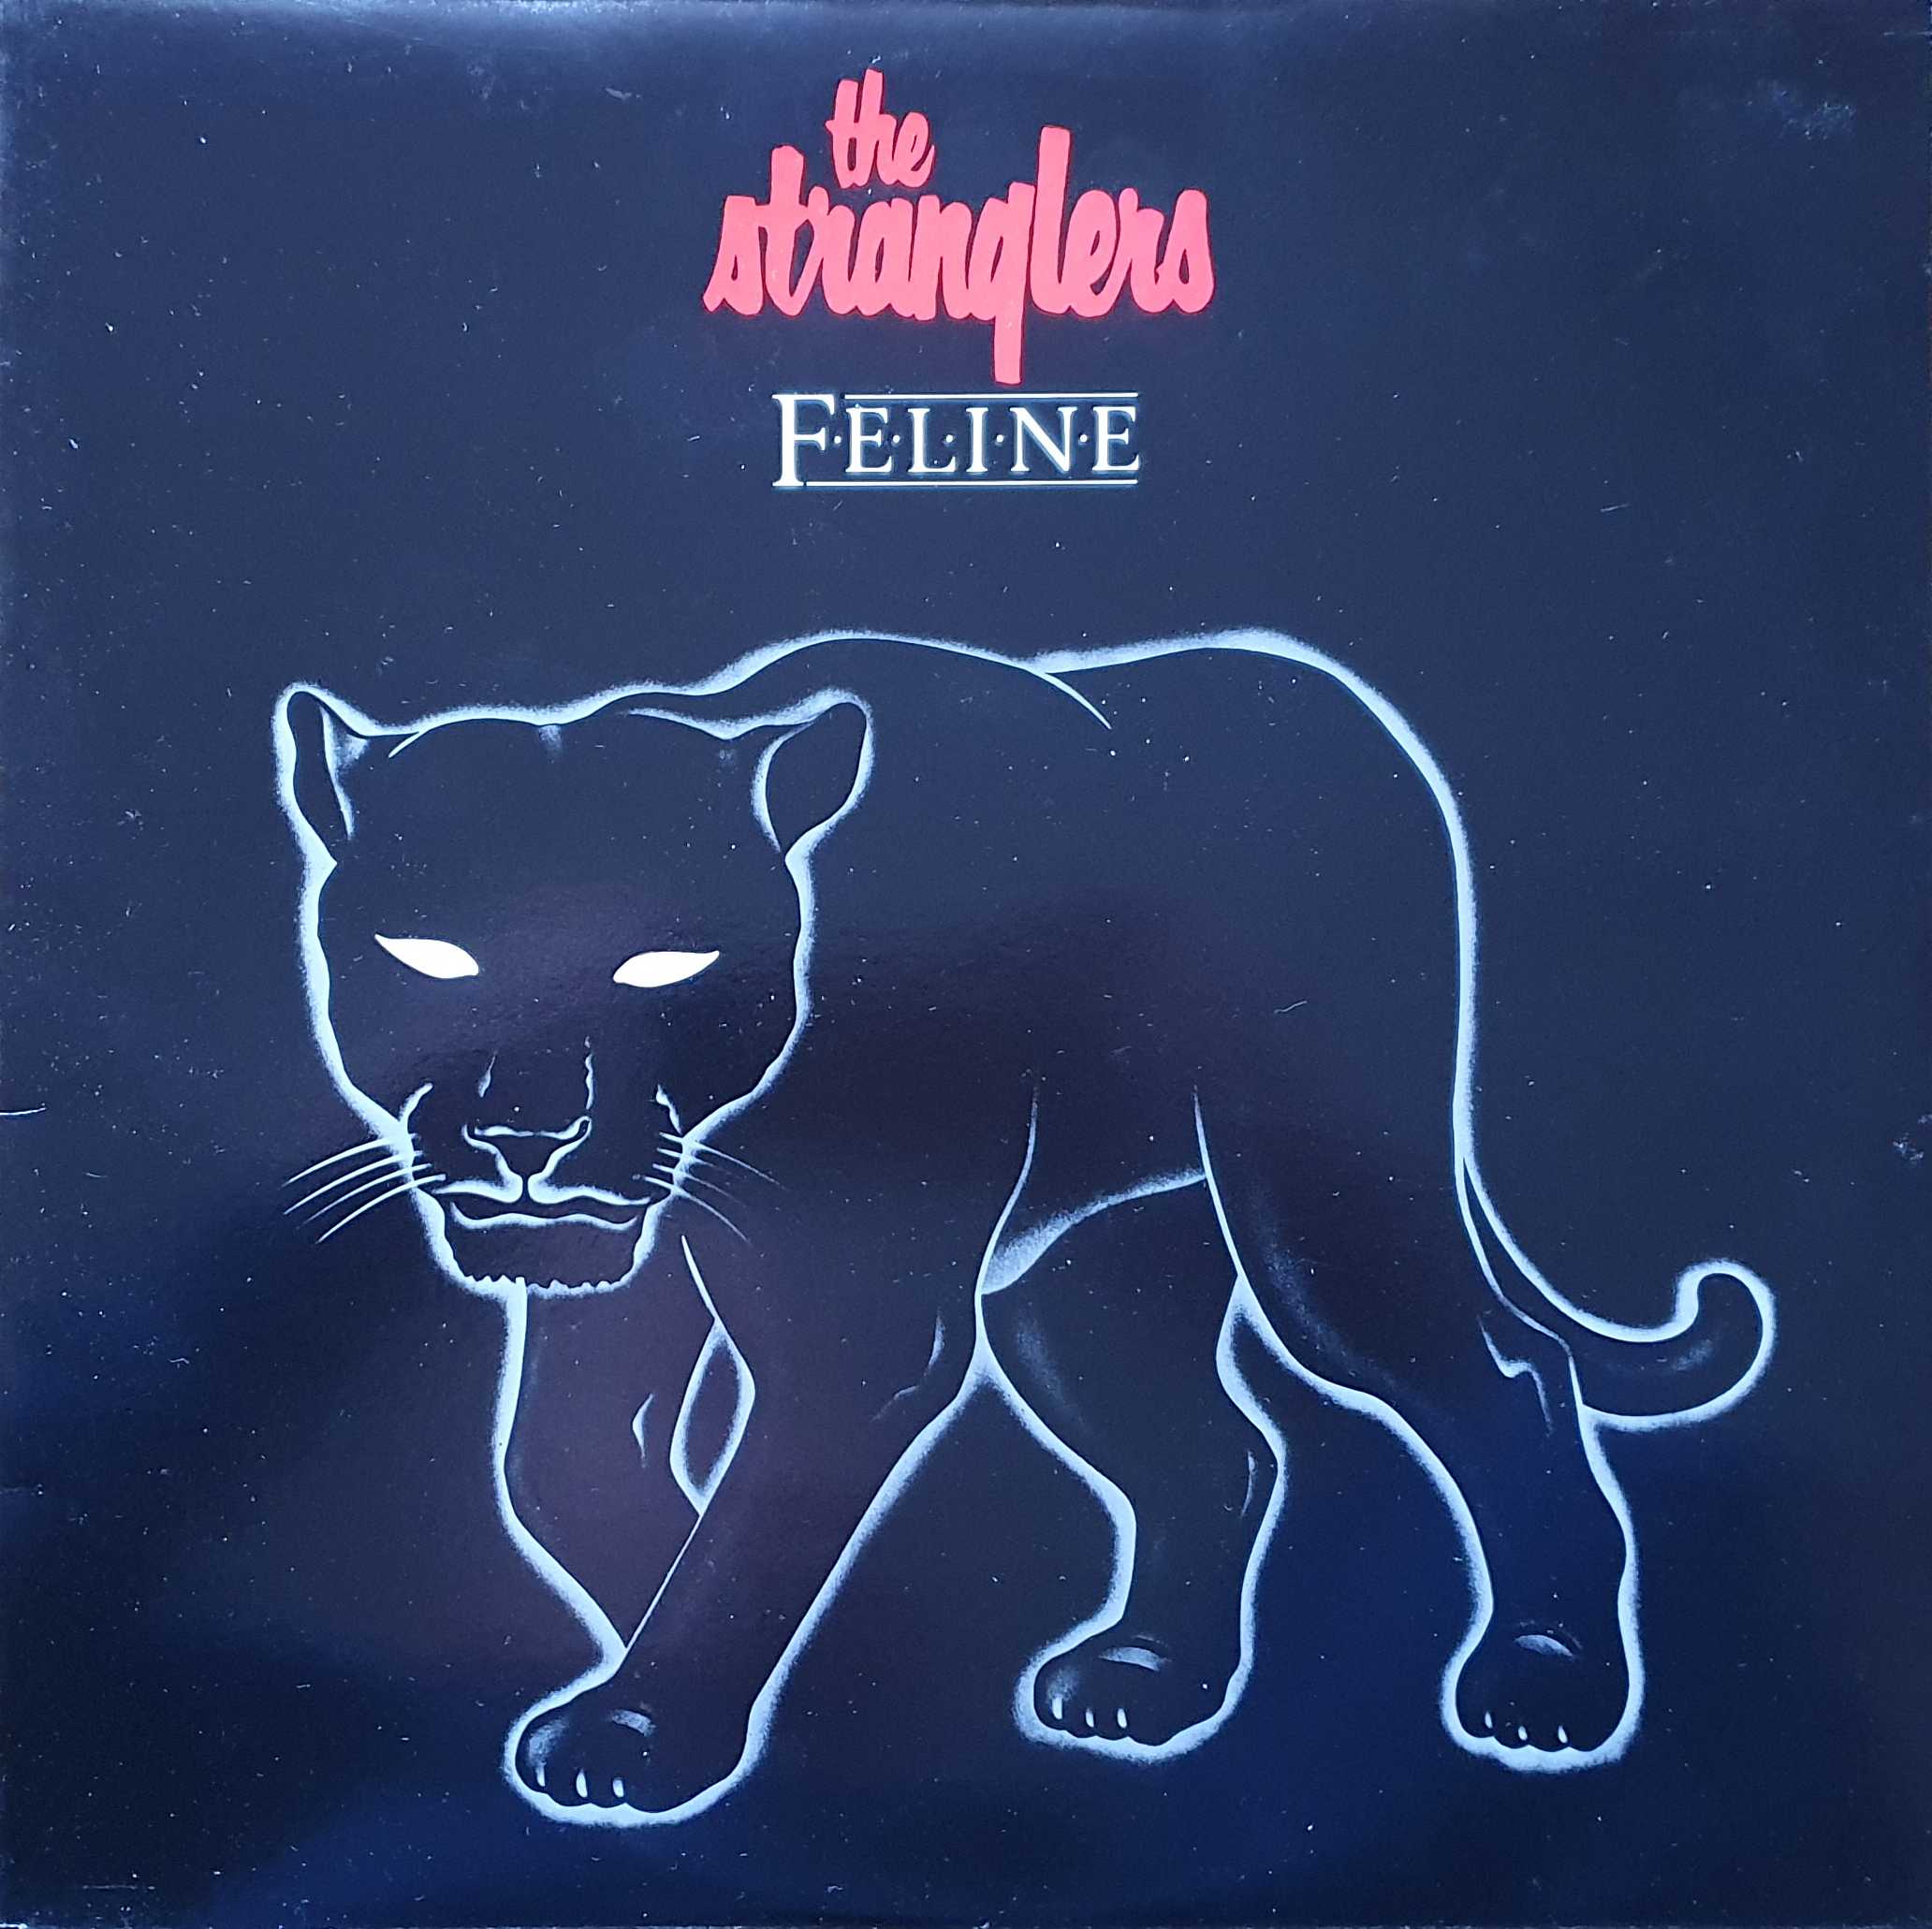 Picture of EPC 32711 Feline by artist The Stranglers 